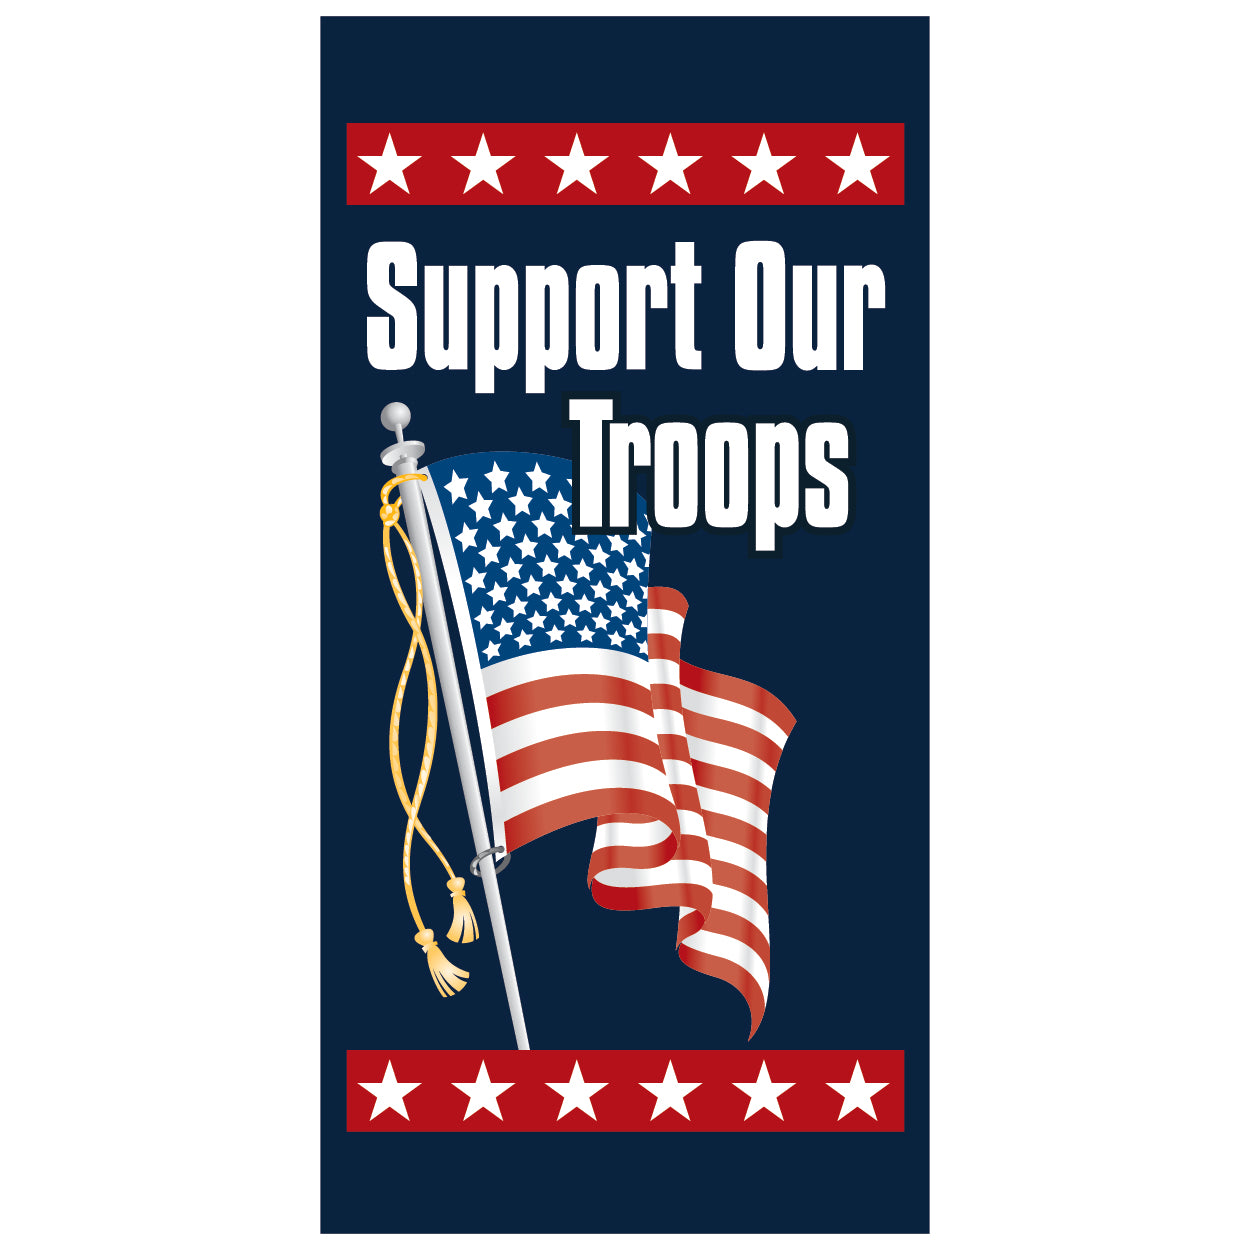 D190 Support Our Troops - Pole Banner